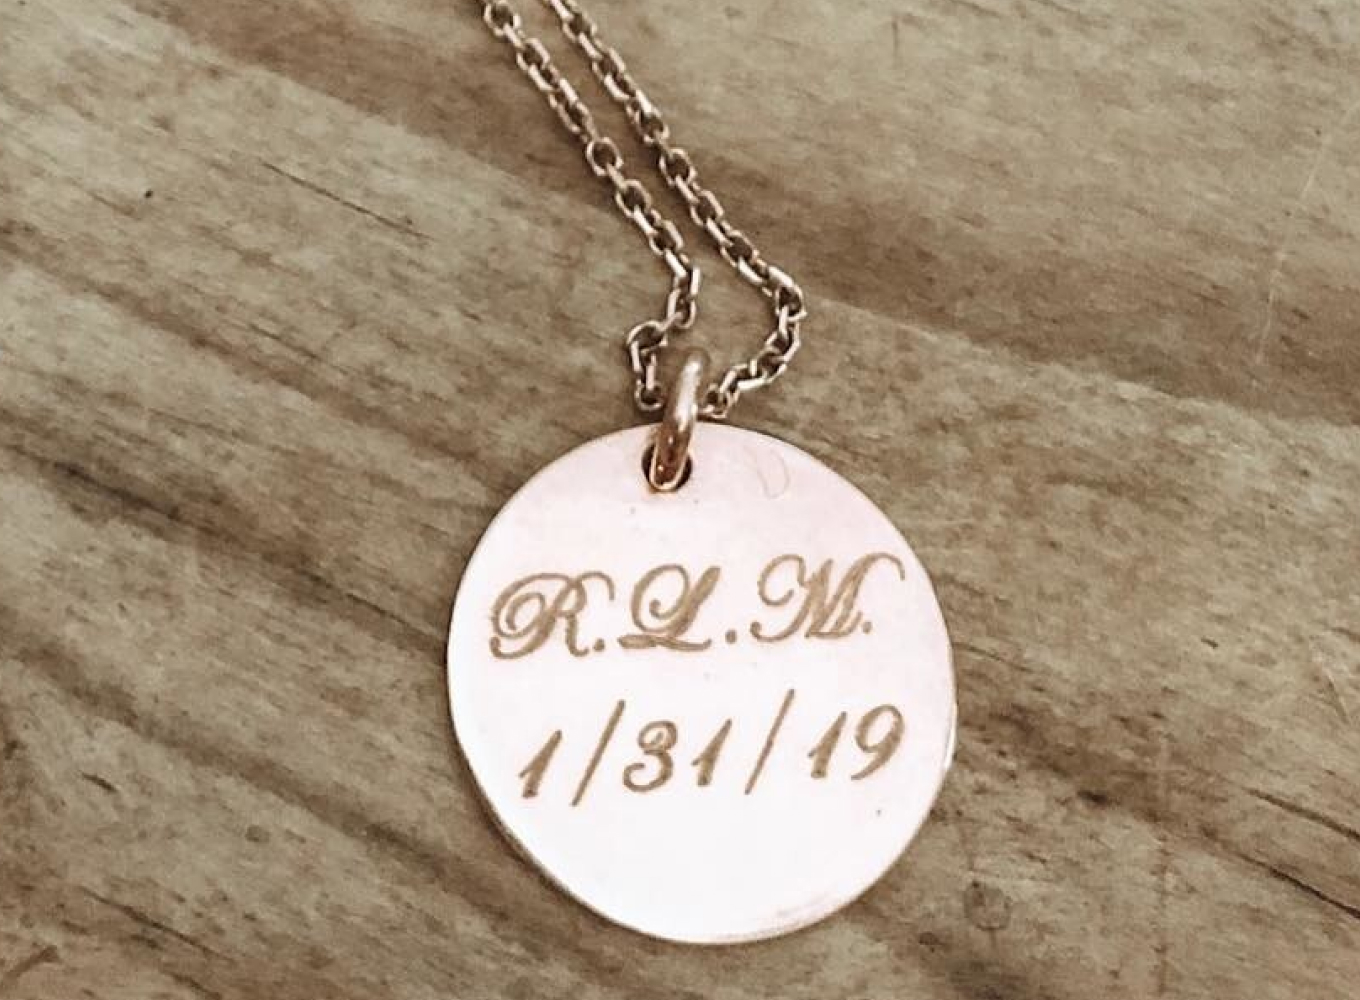 gold round pendant engraved with significant date